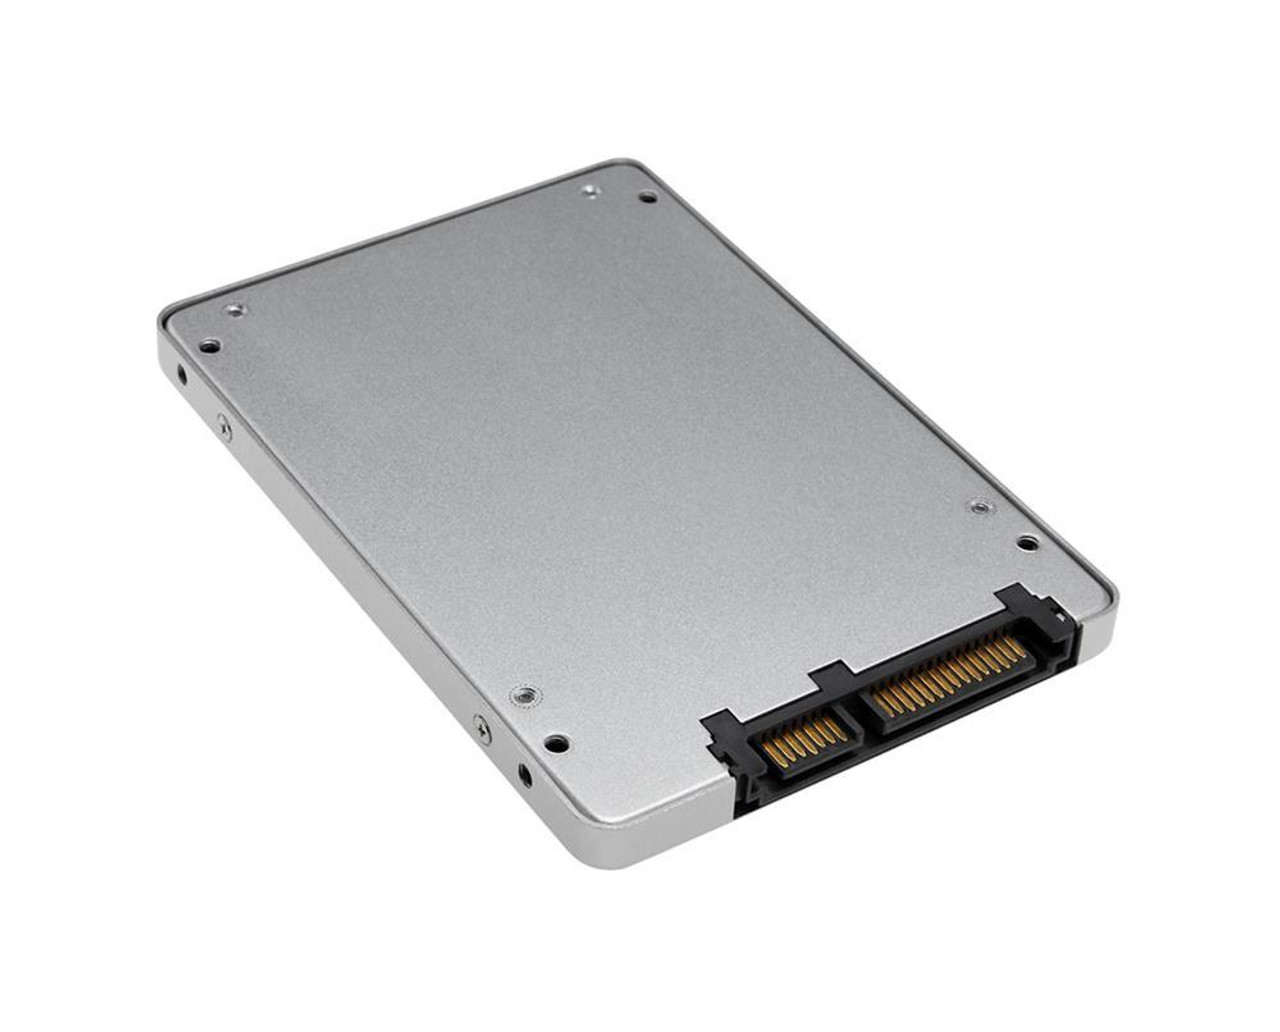 03B01-00022400 Asus 256GB SATA 6Gbps 2.5-inch Internal Solid State Drive (SSD)